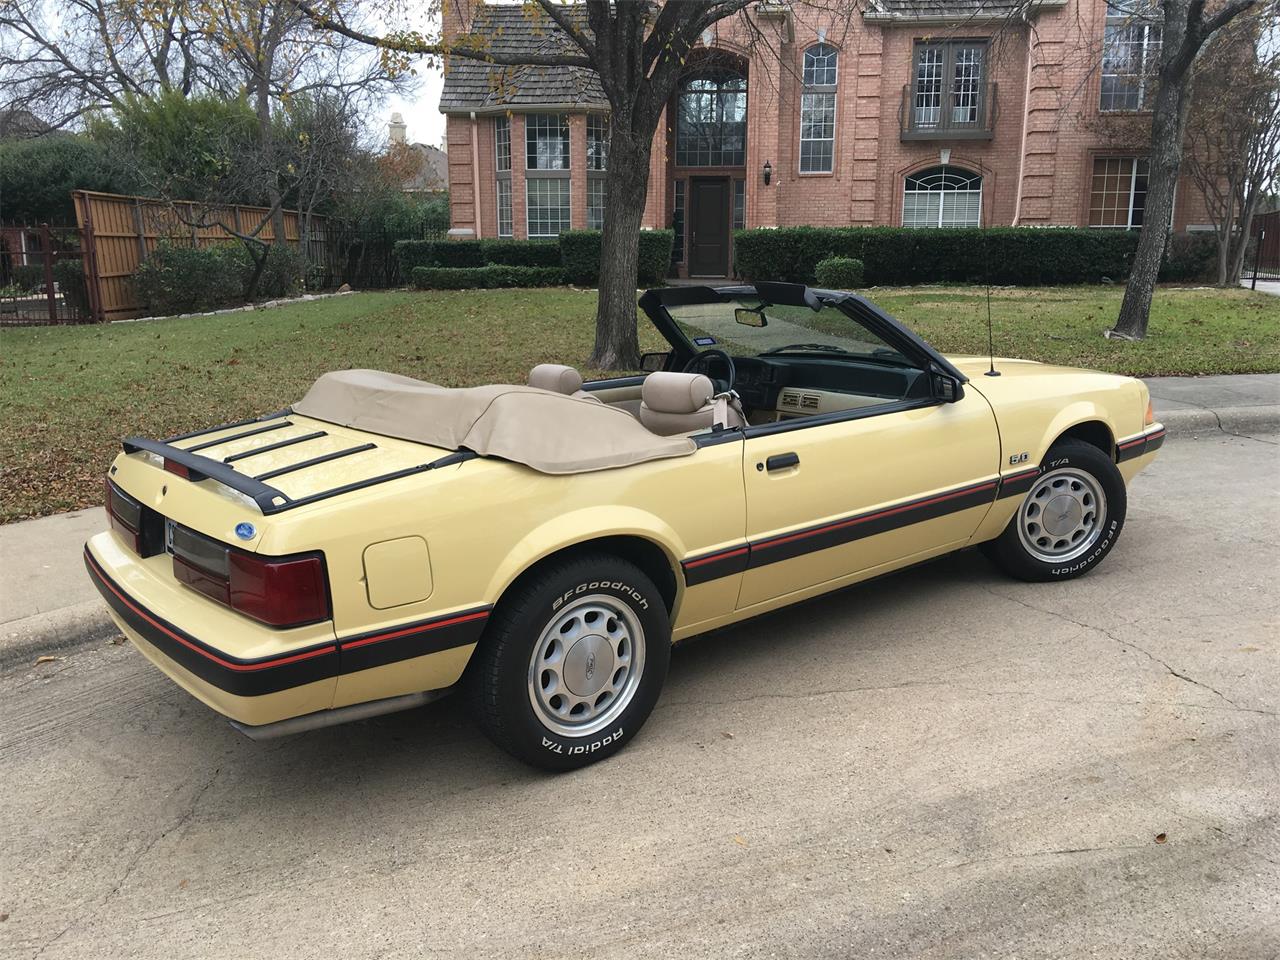 Sand Beige 1987 Ford Mustang